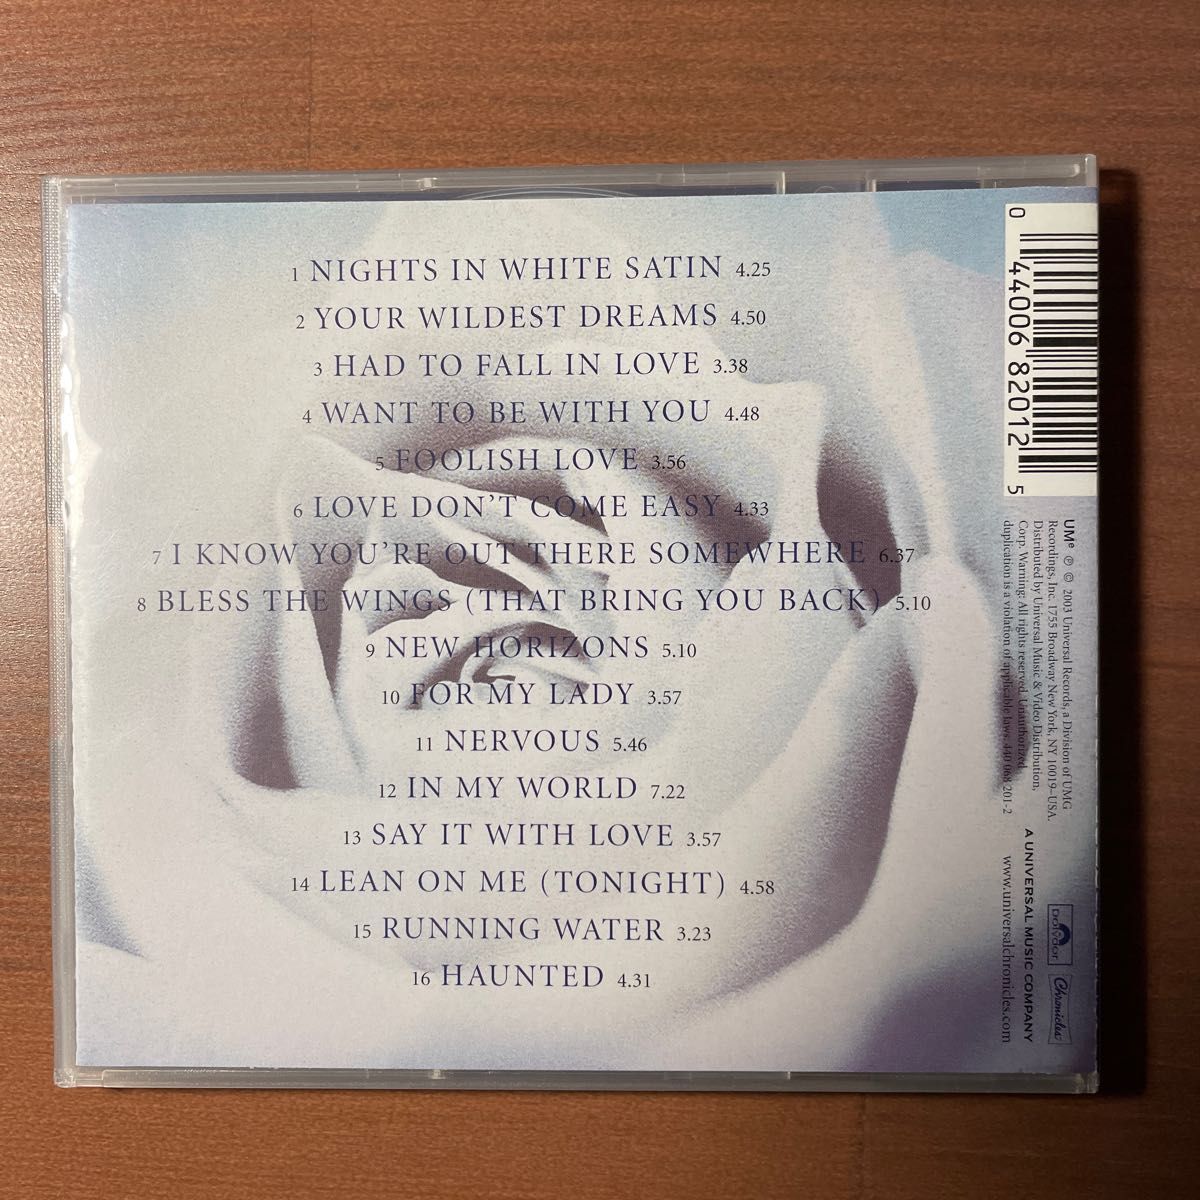 The Moody Blues Say It With Love 輸入盤CD